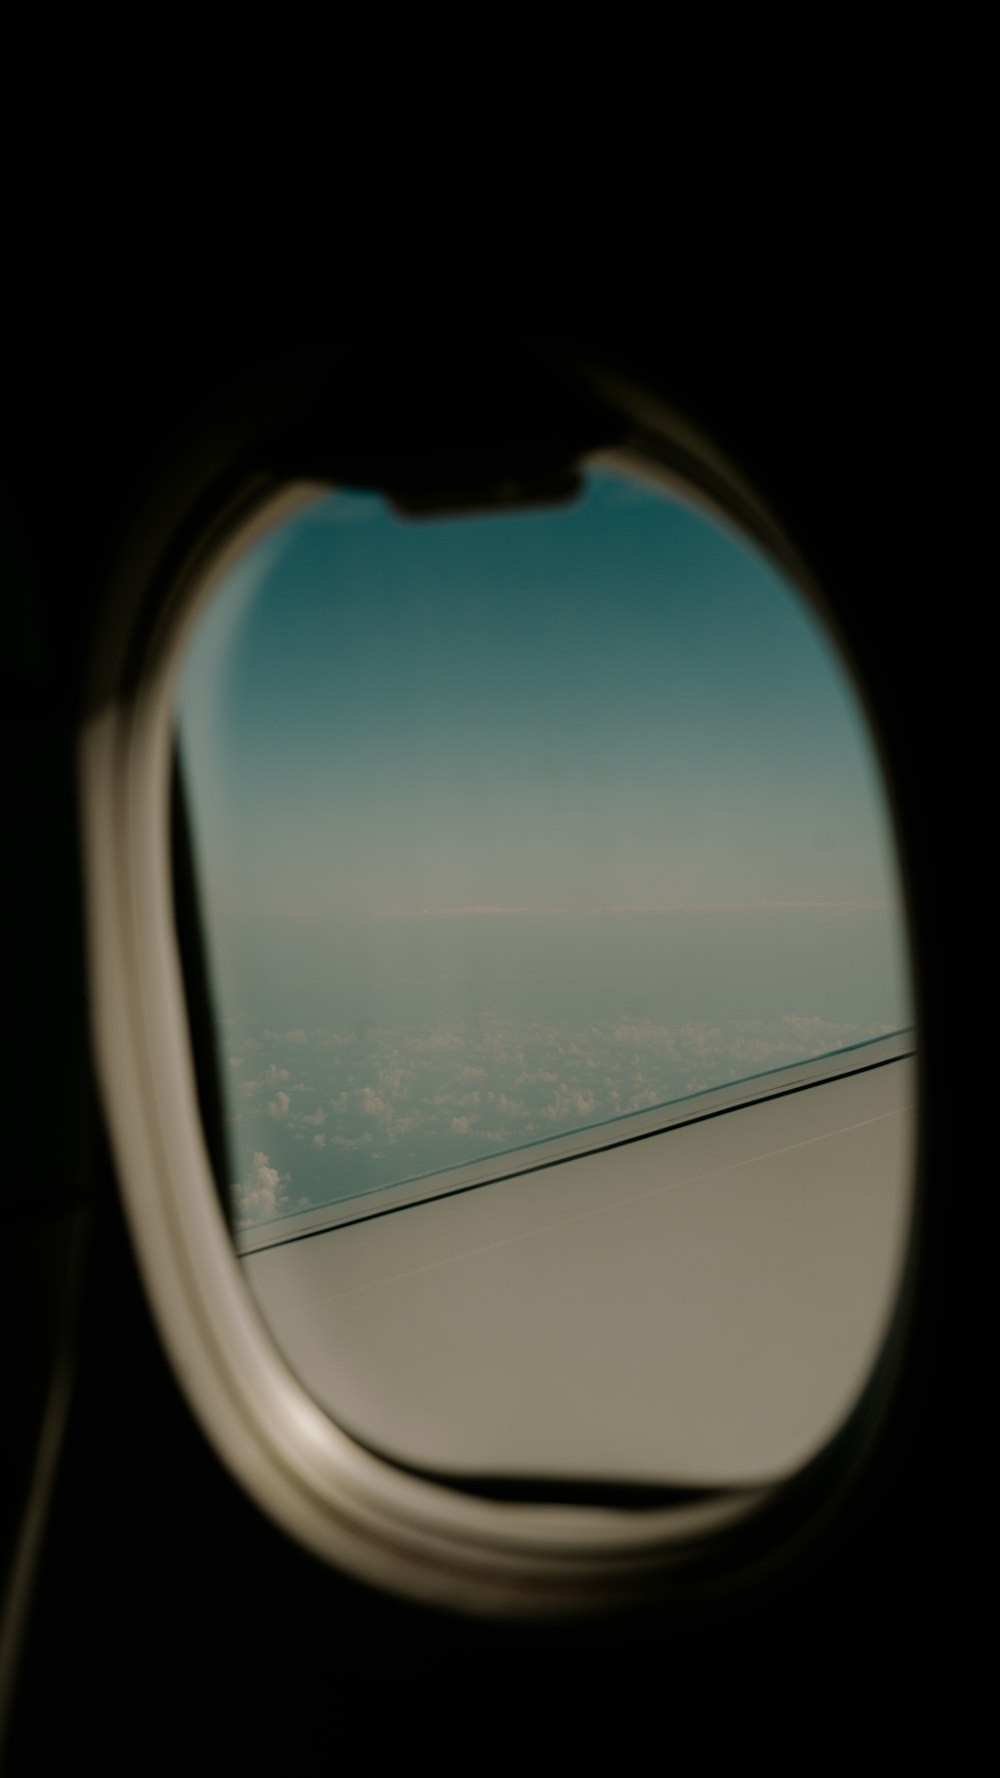 a view of the wing of an airplane through a window